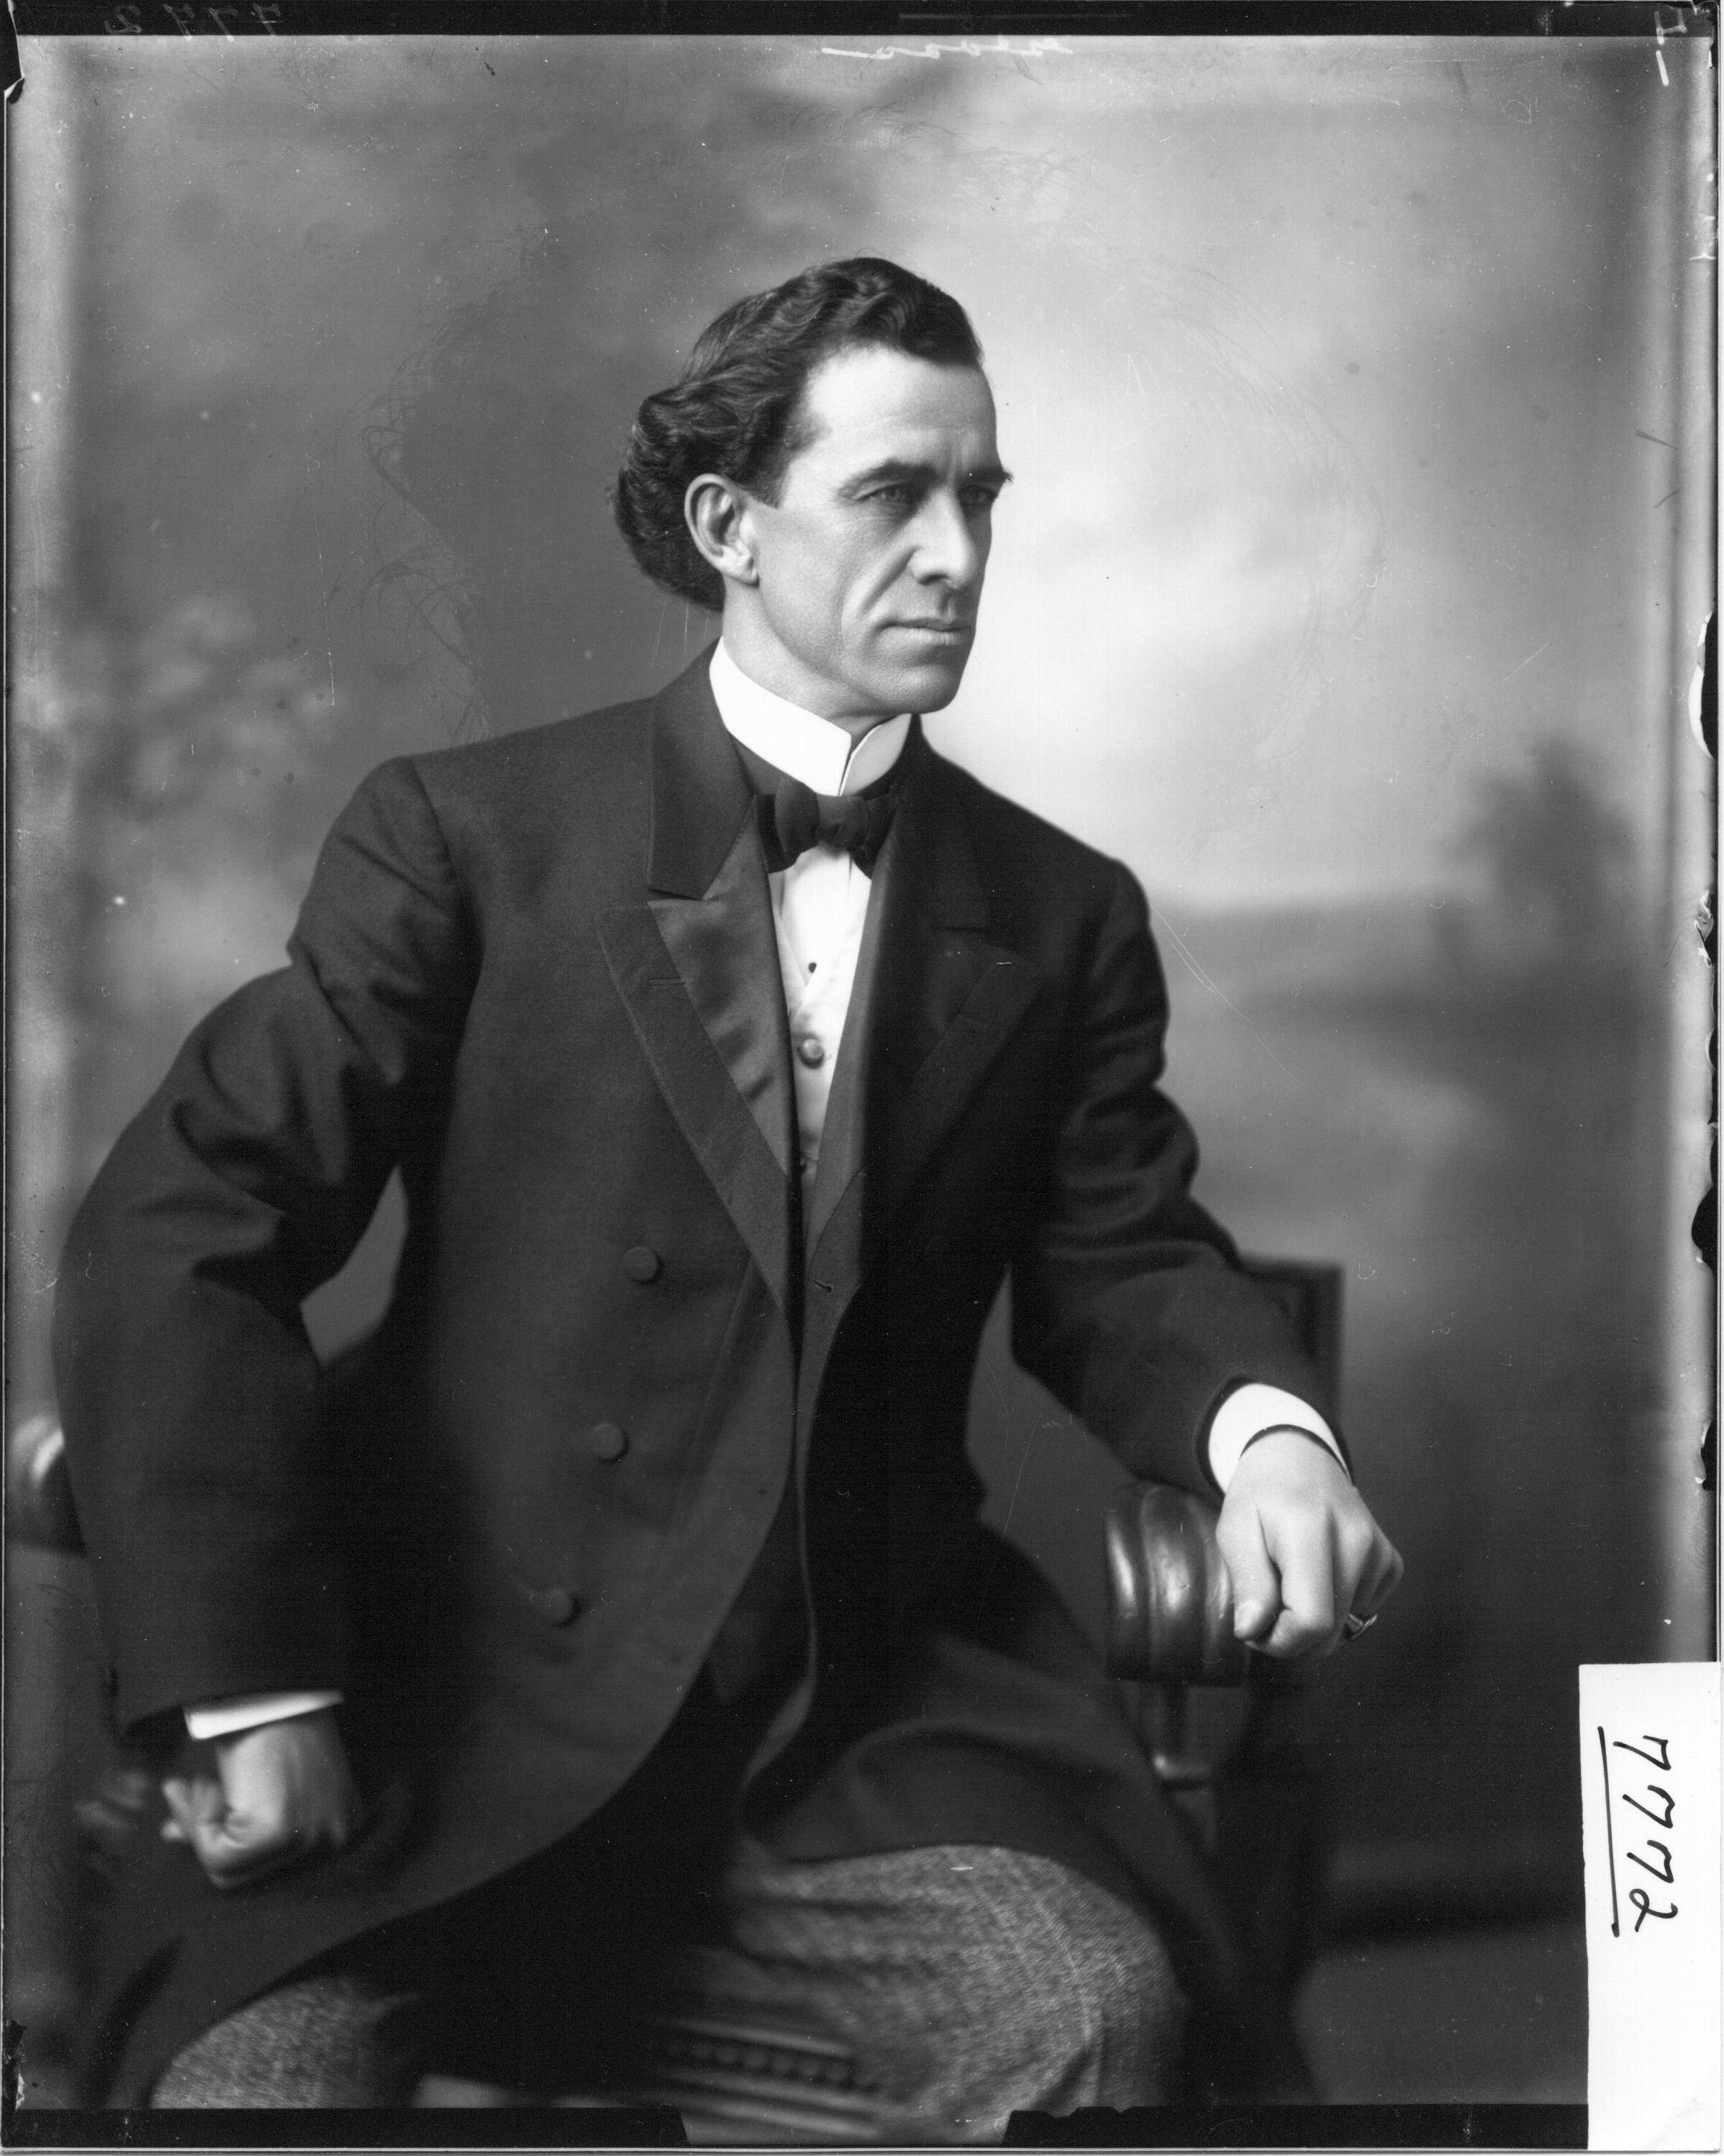 Portrait photograph of William Reeves 1907 (3195530688)